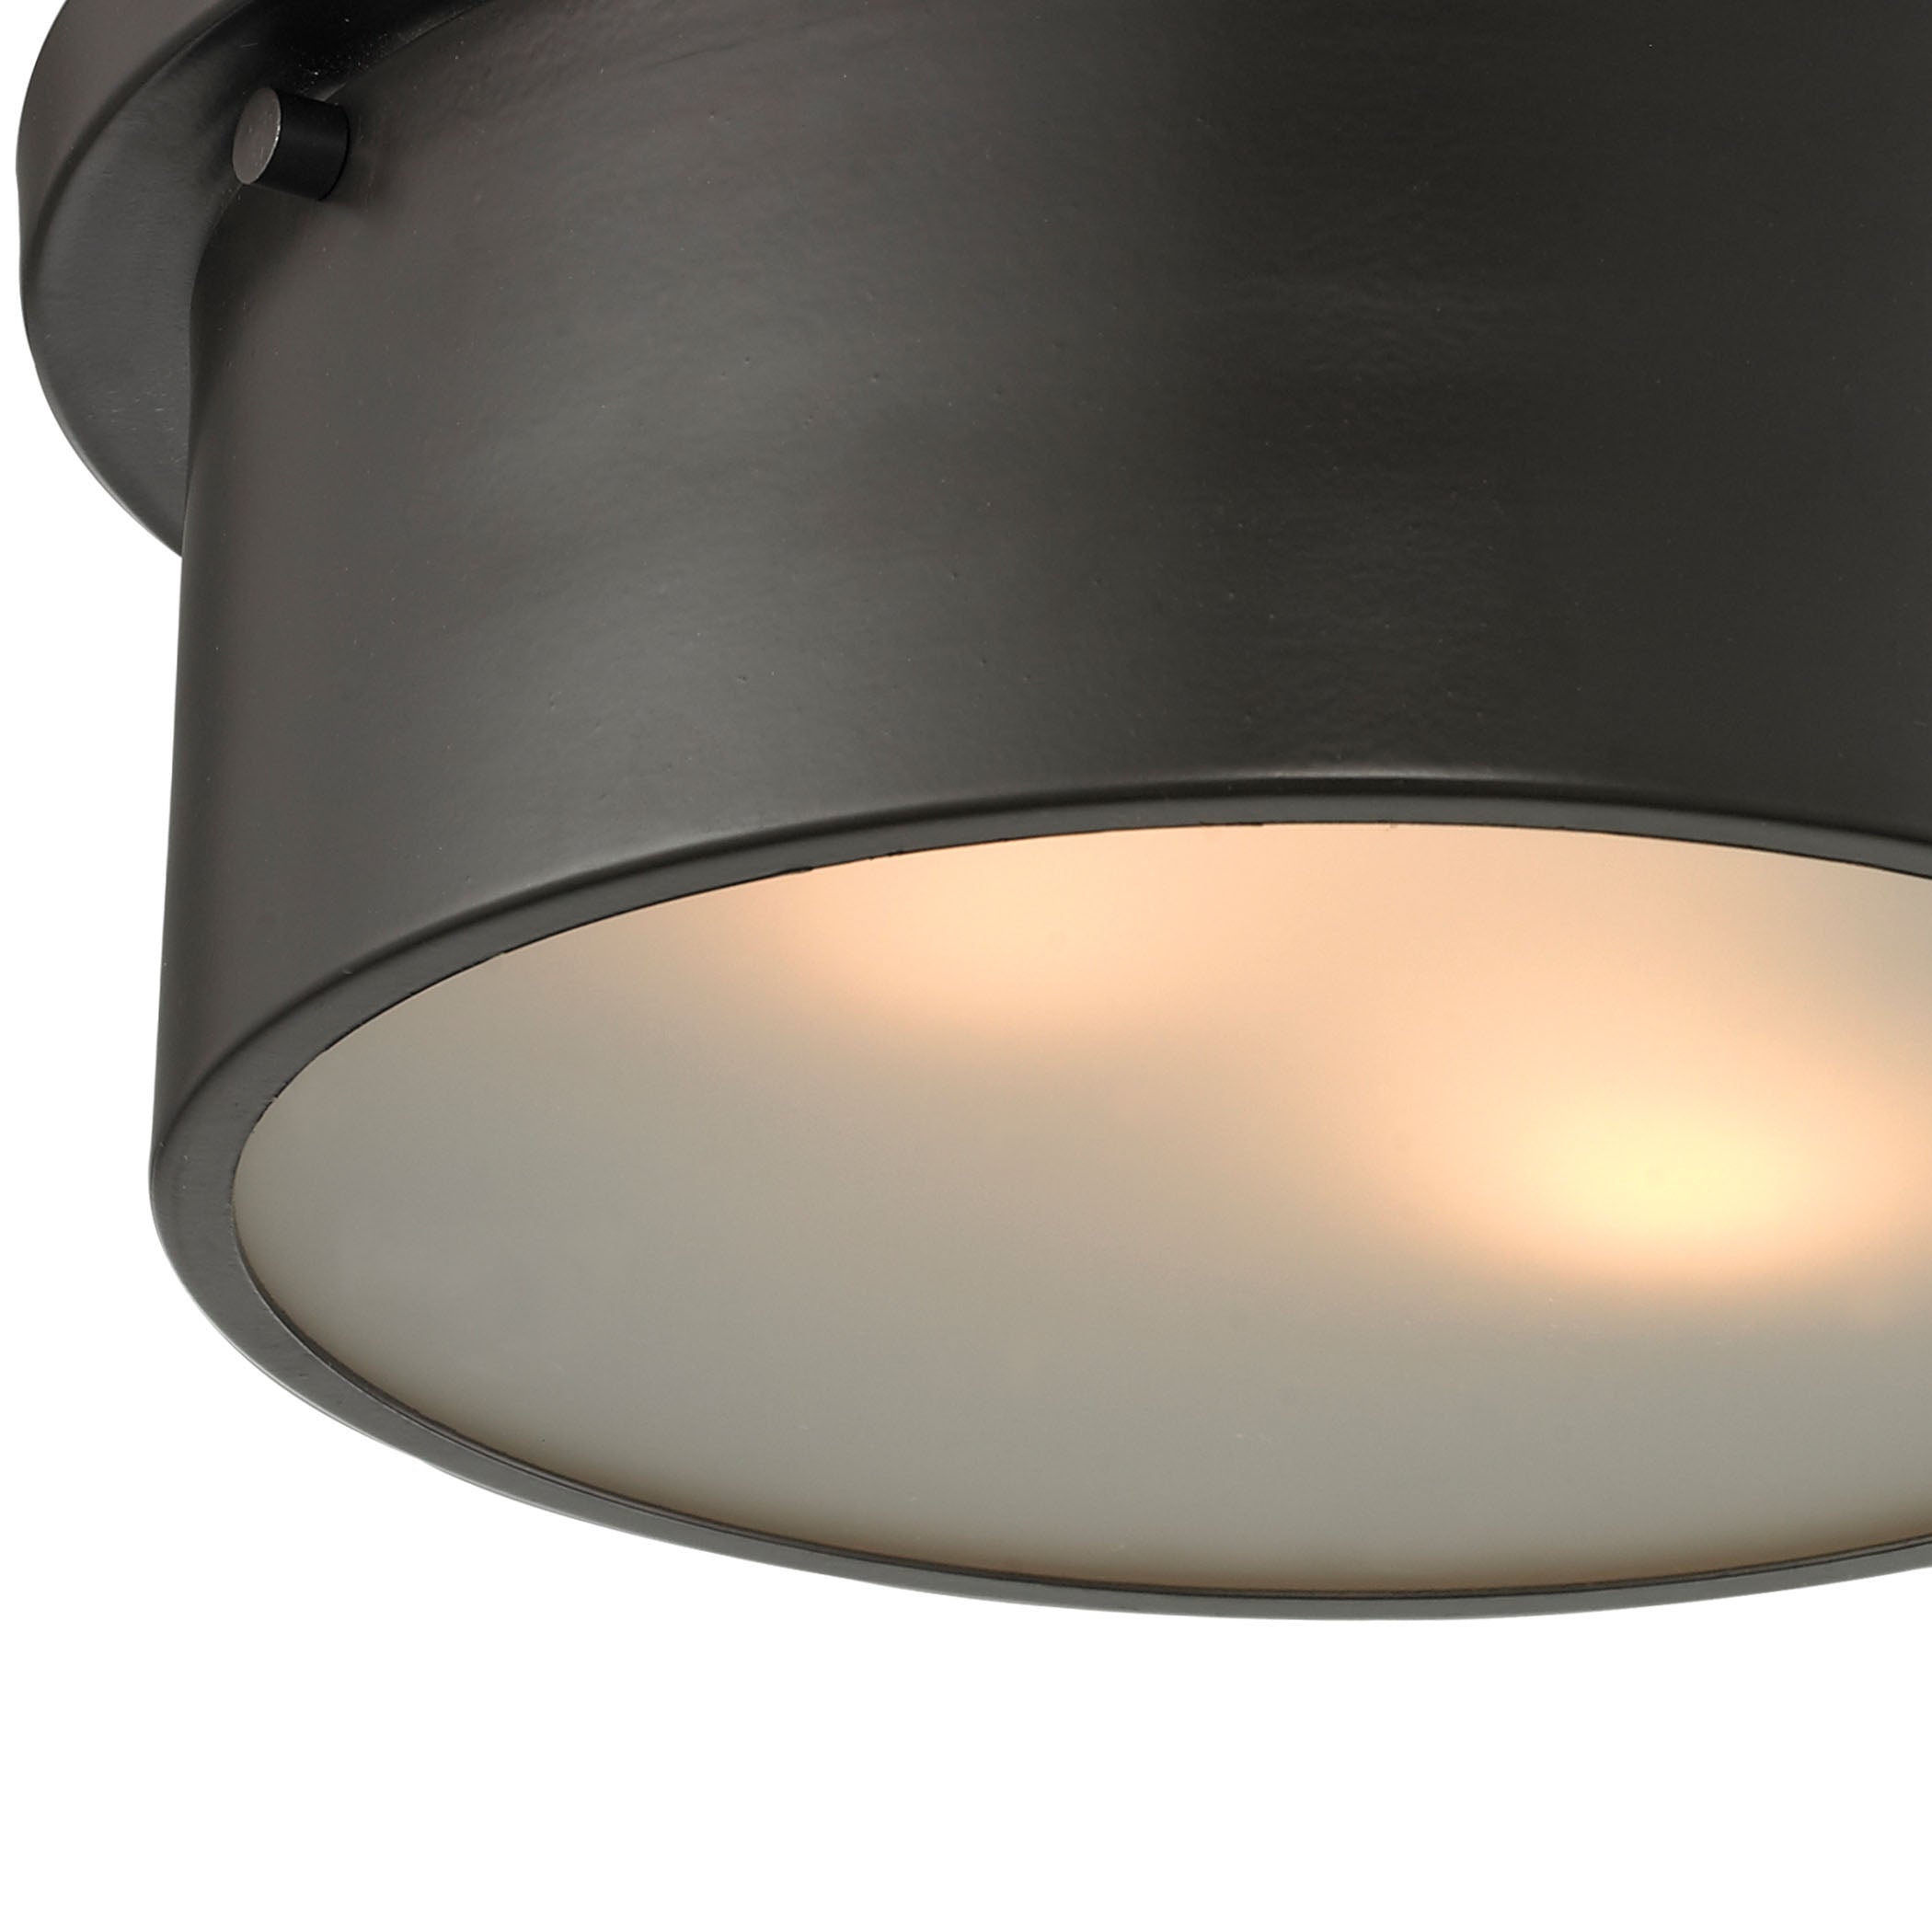 ELK Lighting 11810/2 Simpson 2-Light Flush Mount in Oil Rubbed Bronze with Frosted White Diffuser